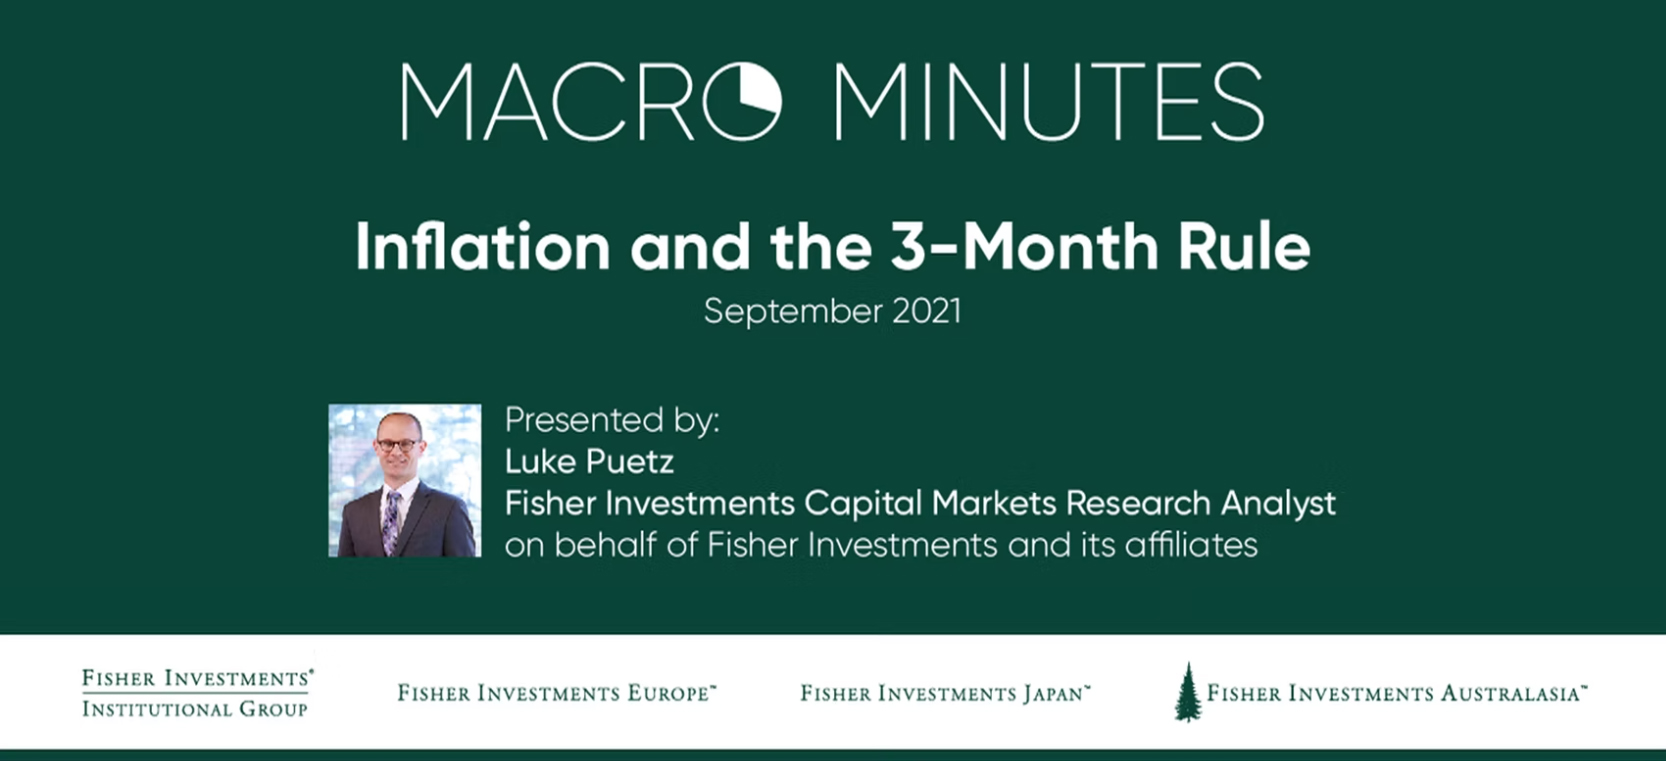 Macro Minutes: Inflation and the 3-Month Rule